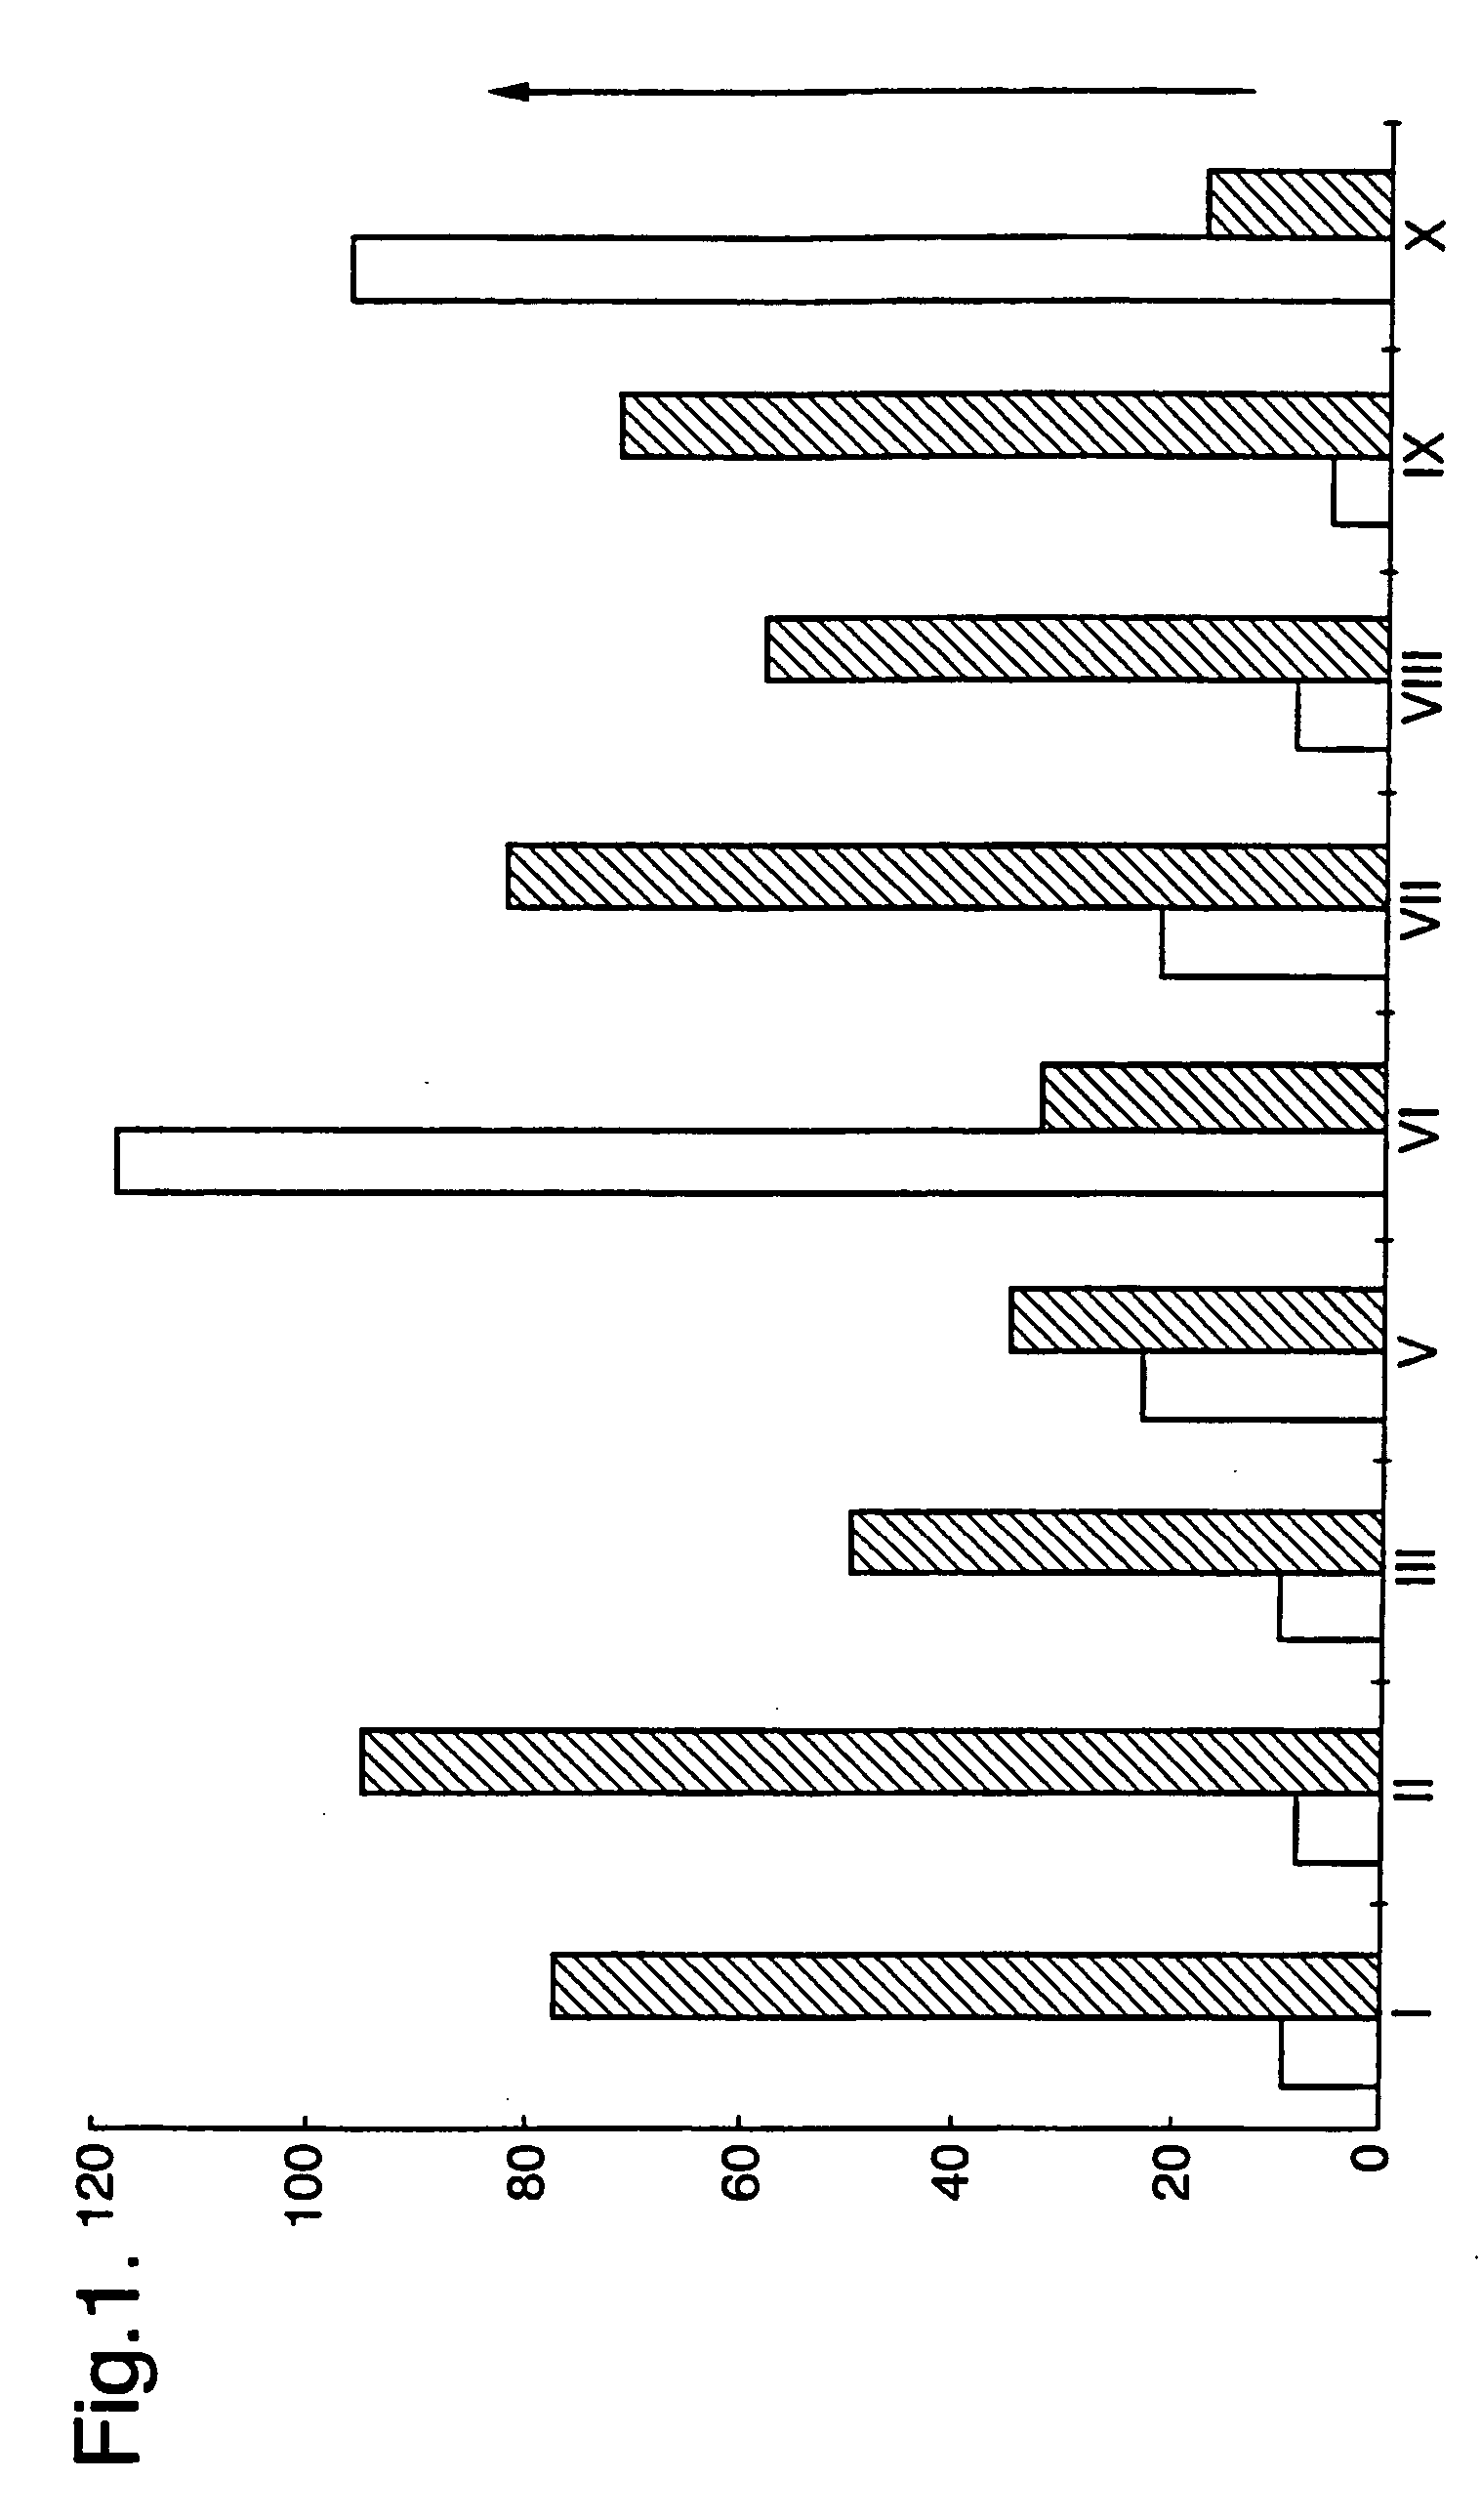 Compounds for inhibiting diseases and preparing cells for transplantation